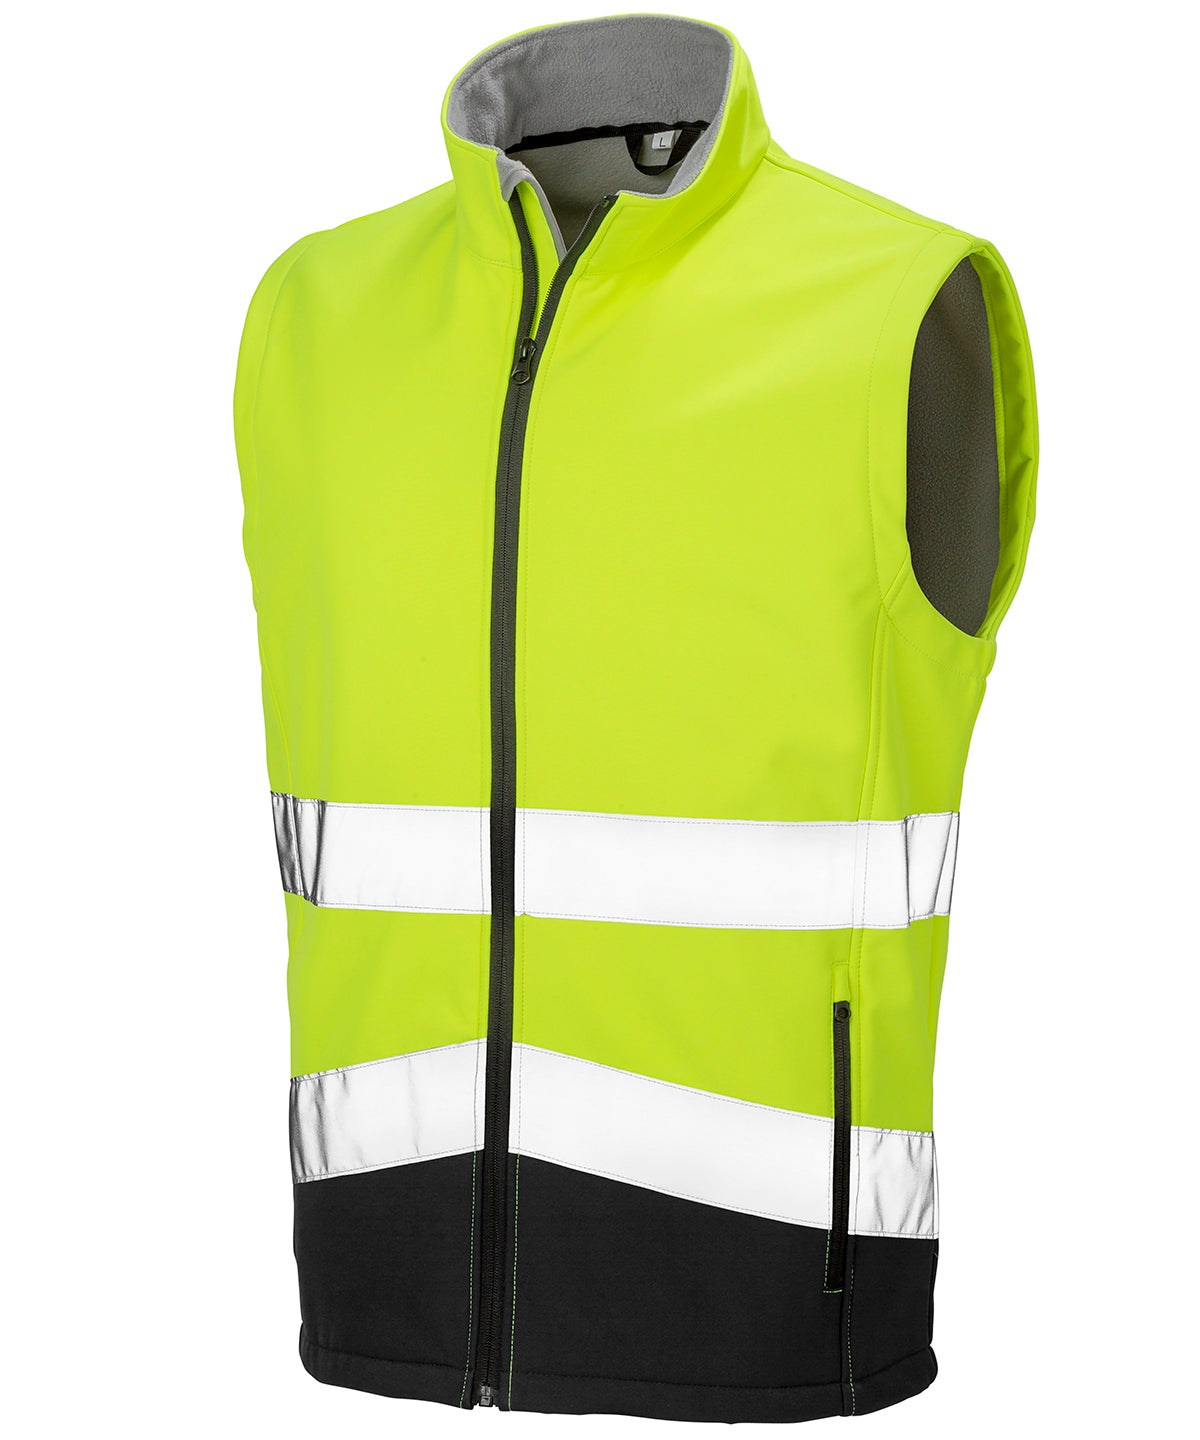 Soft Shell Body Warmer Gilet Jacket - 10MPH, CAMERA IN USE PLEASE SLOW DOWN